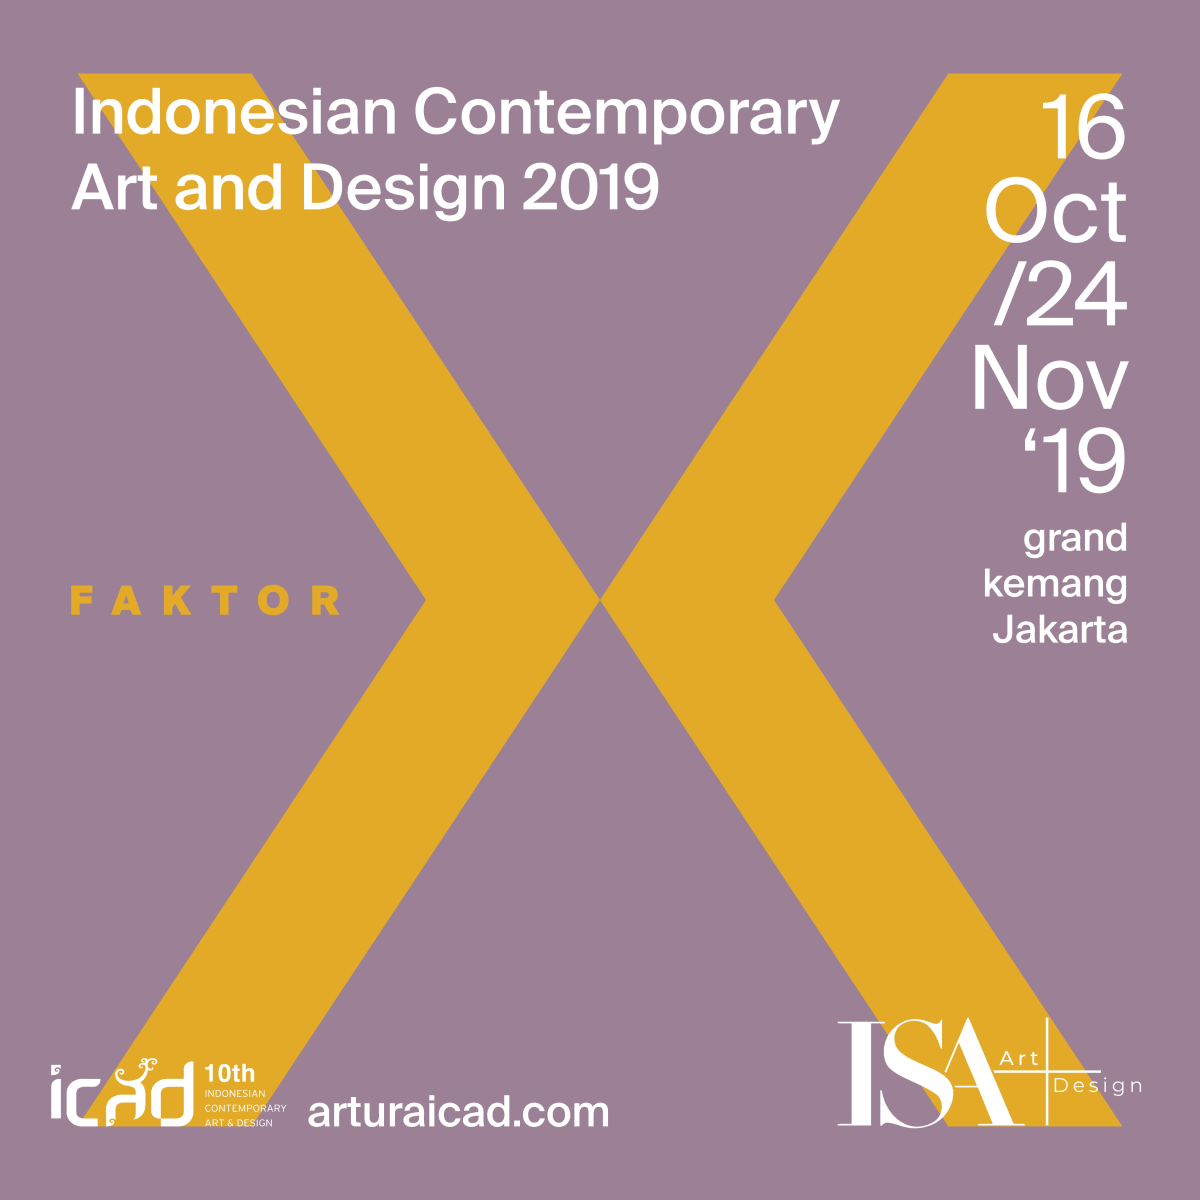 icad events